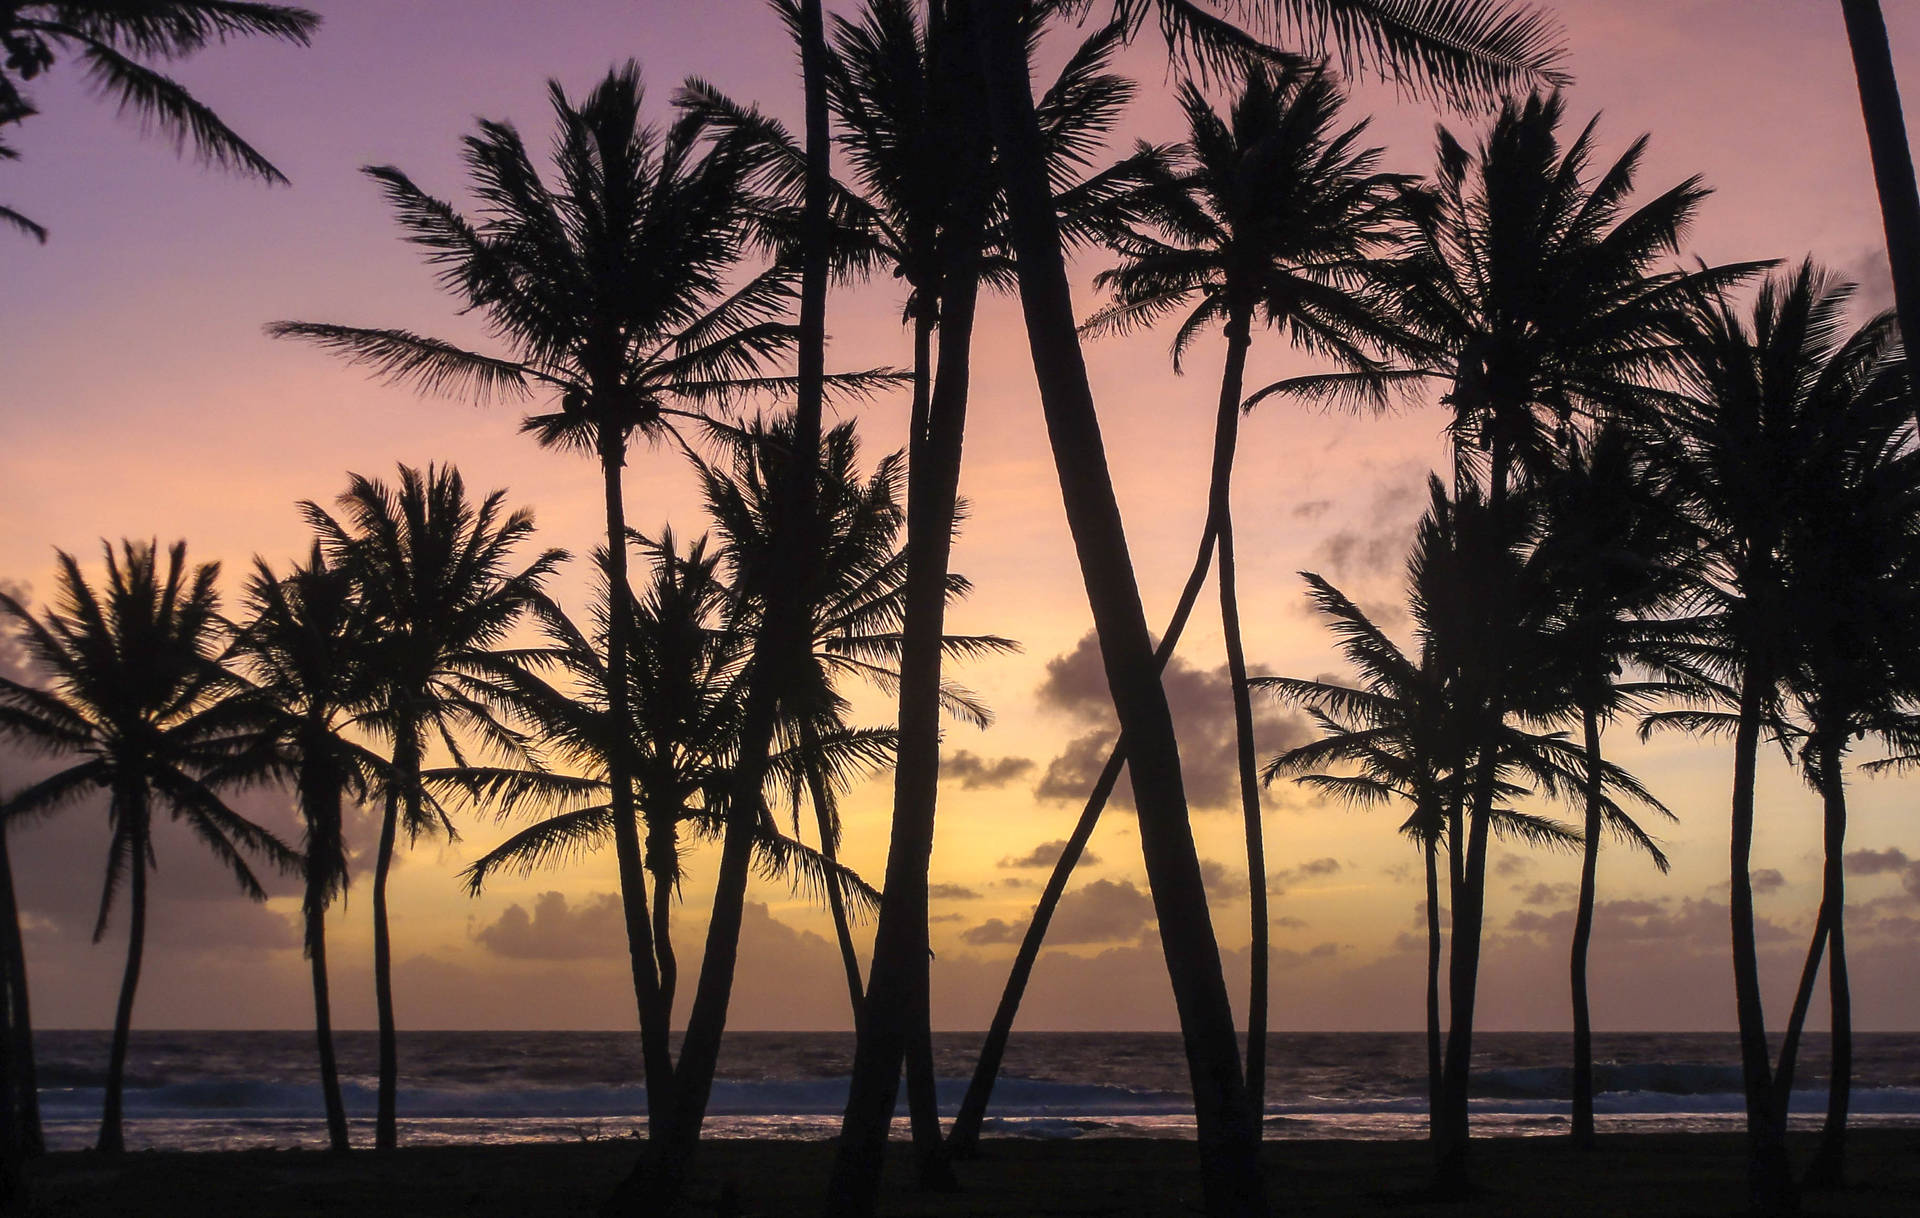 Pine Trees At Sunset In Marshall Islands Background